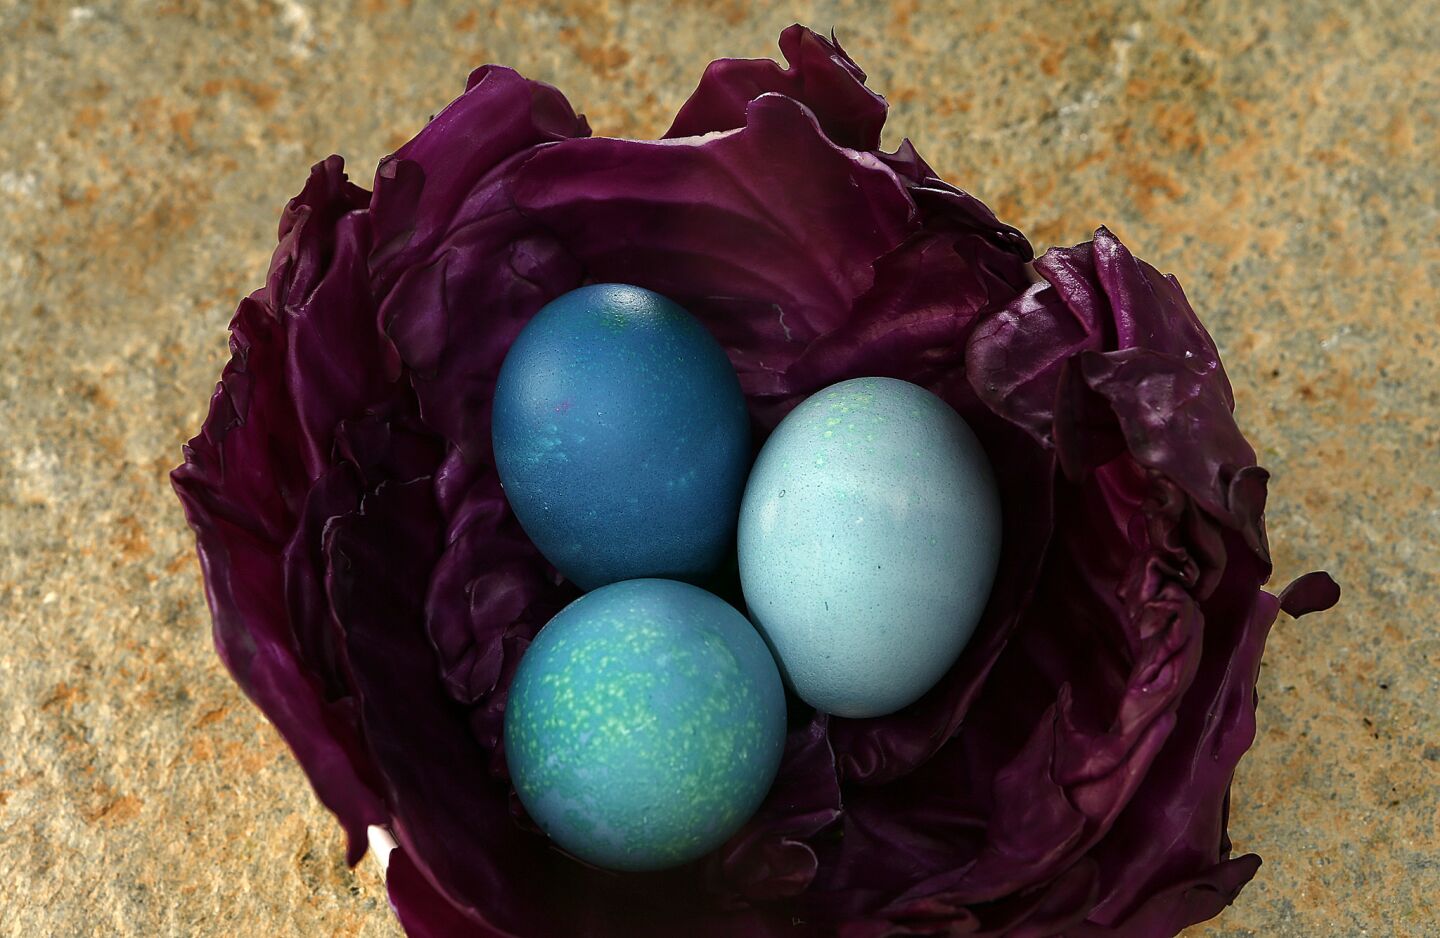 Red cabbage, blue eggs